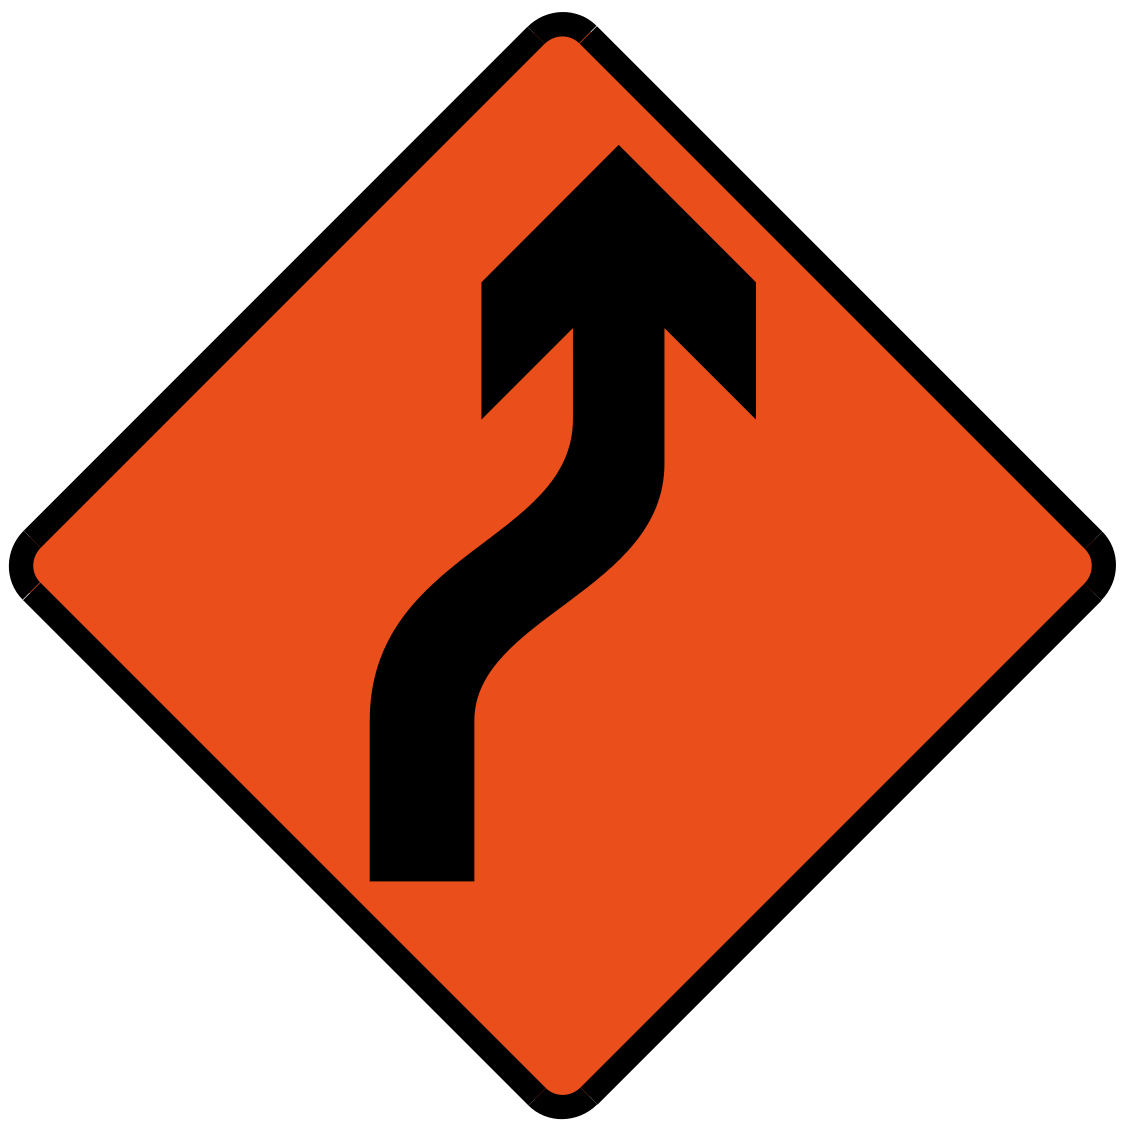 Bend to right (Left if symbol is reversed)